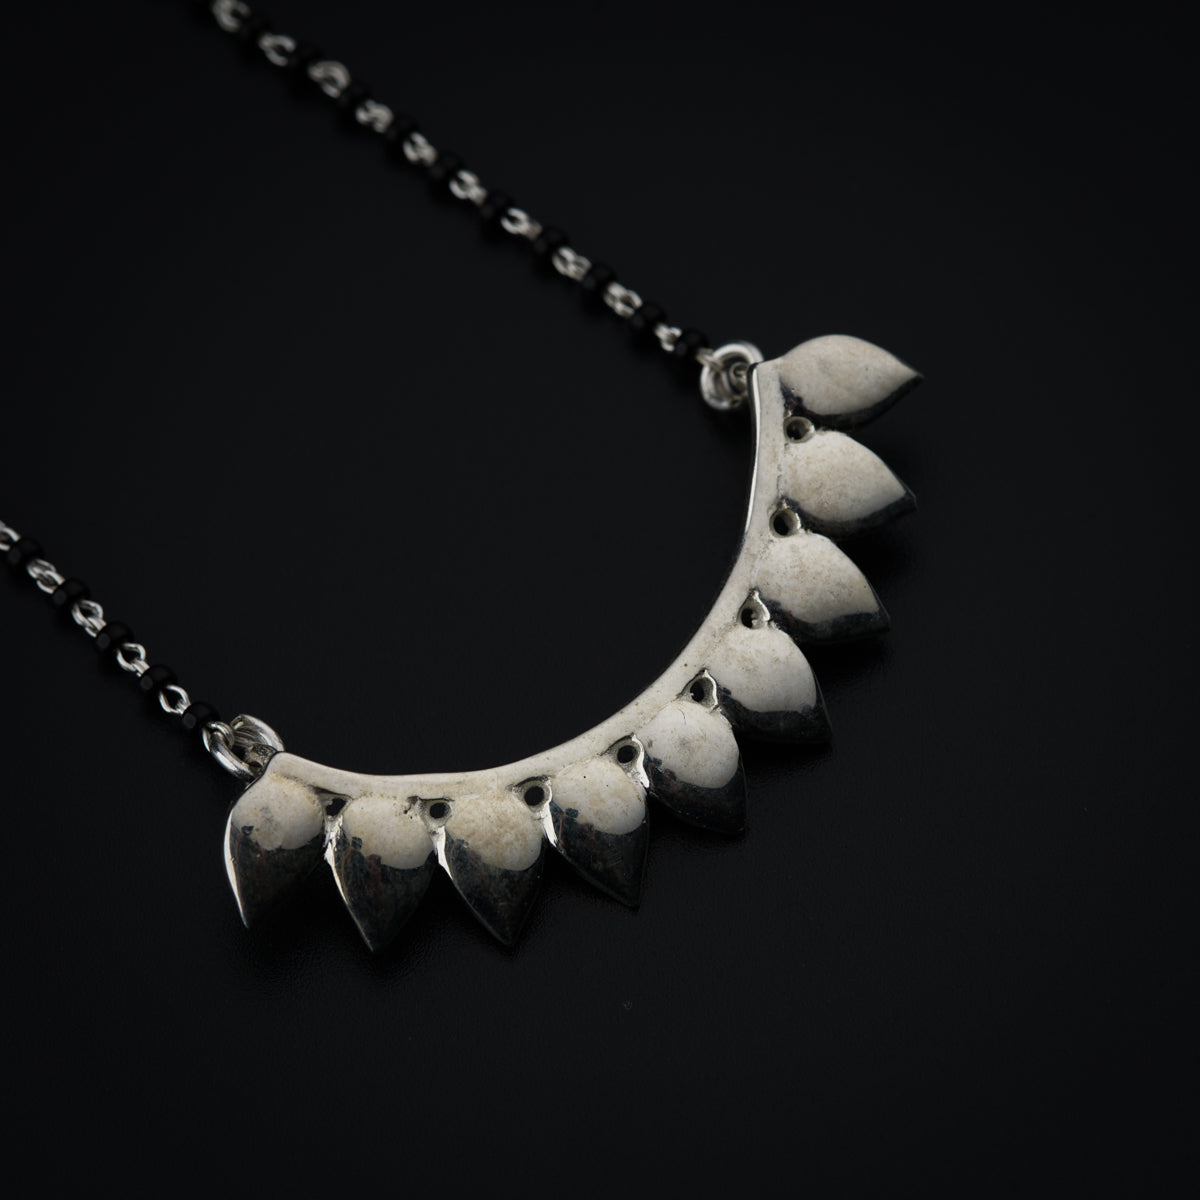 a close up of a necklace on a black background